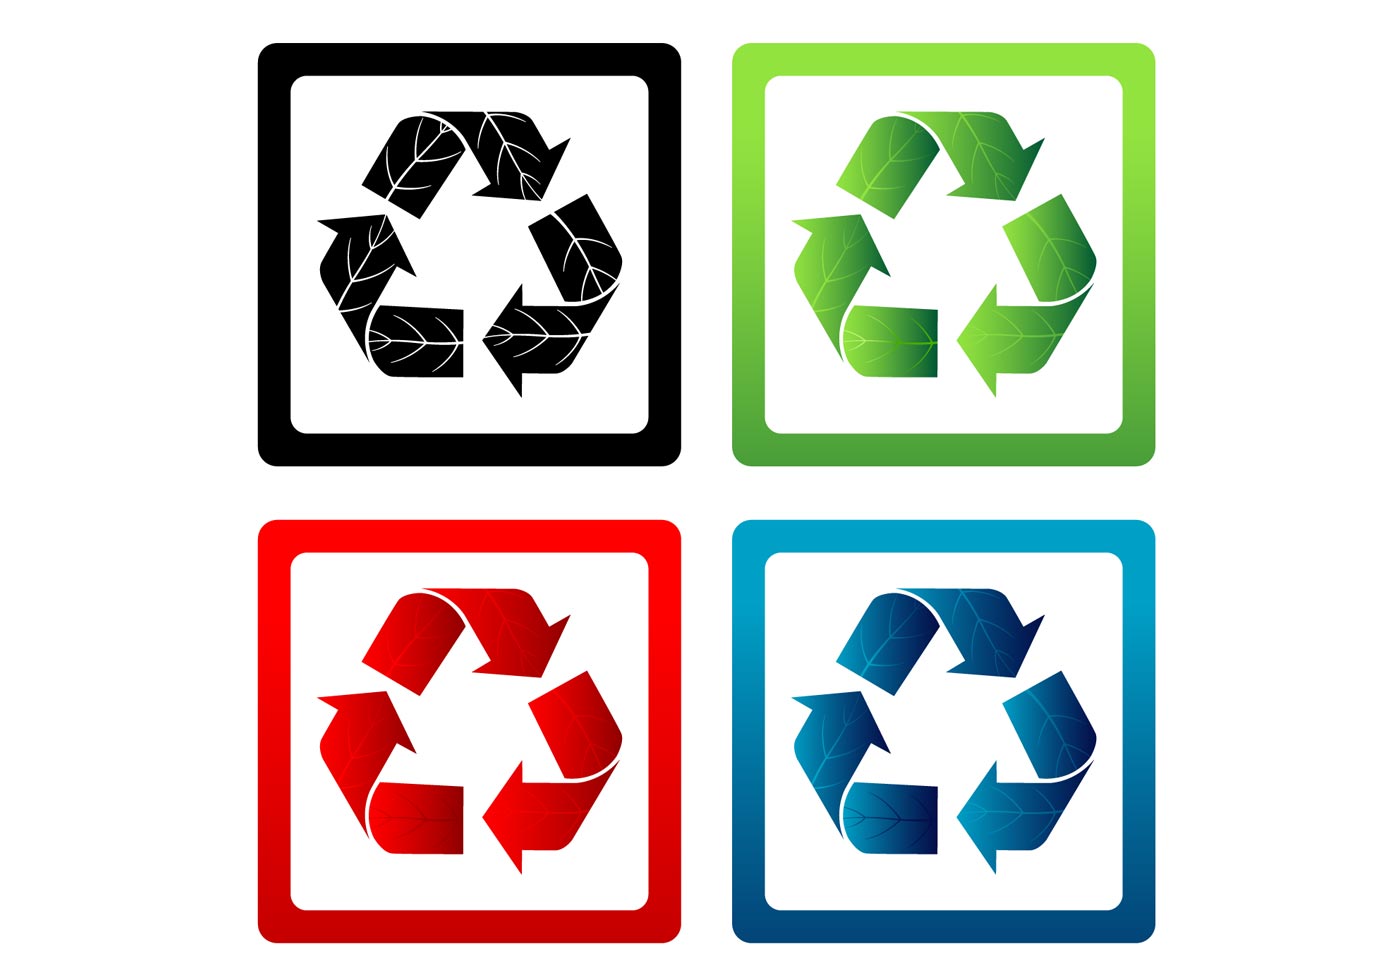 Recycling Symbol Free Vector Art - (13534 Free Downloads)